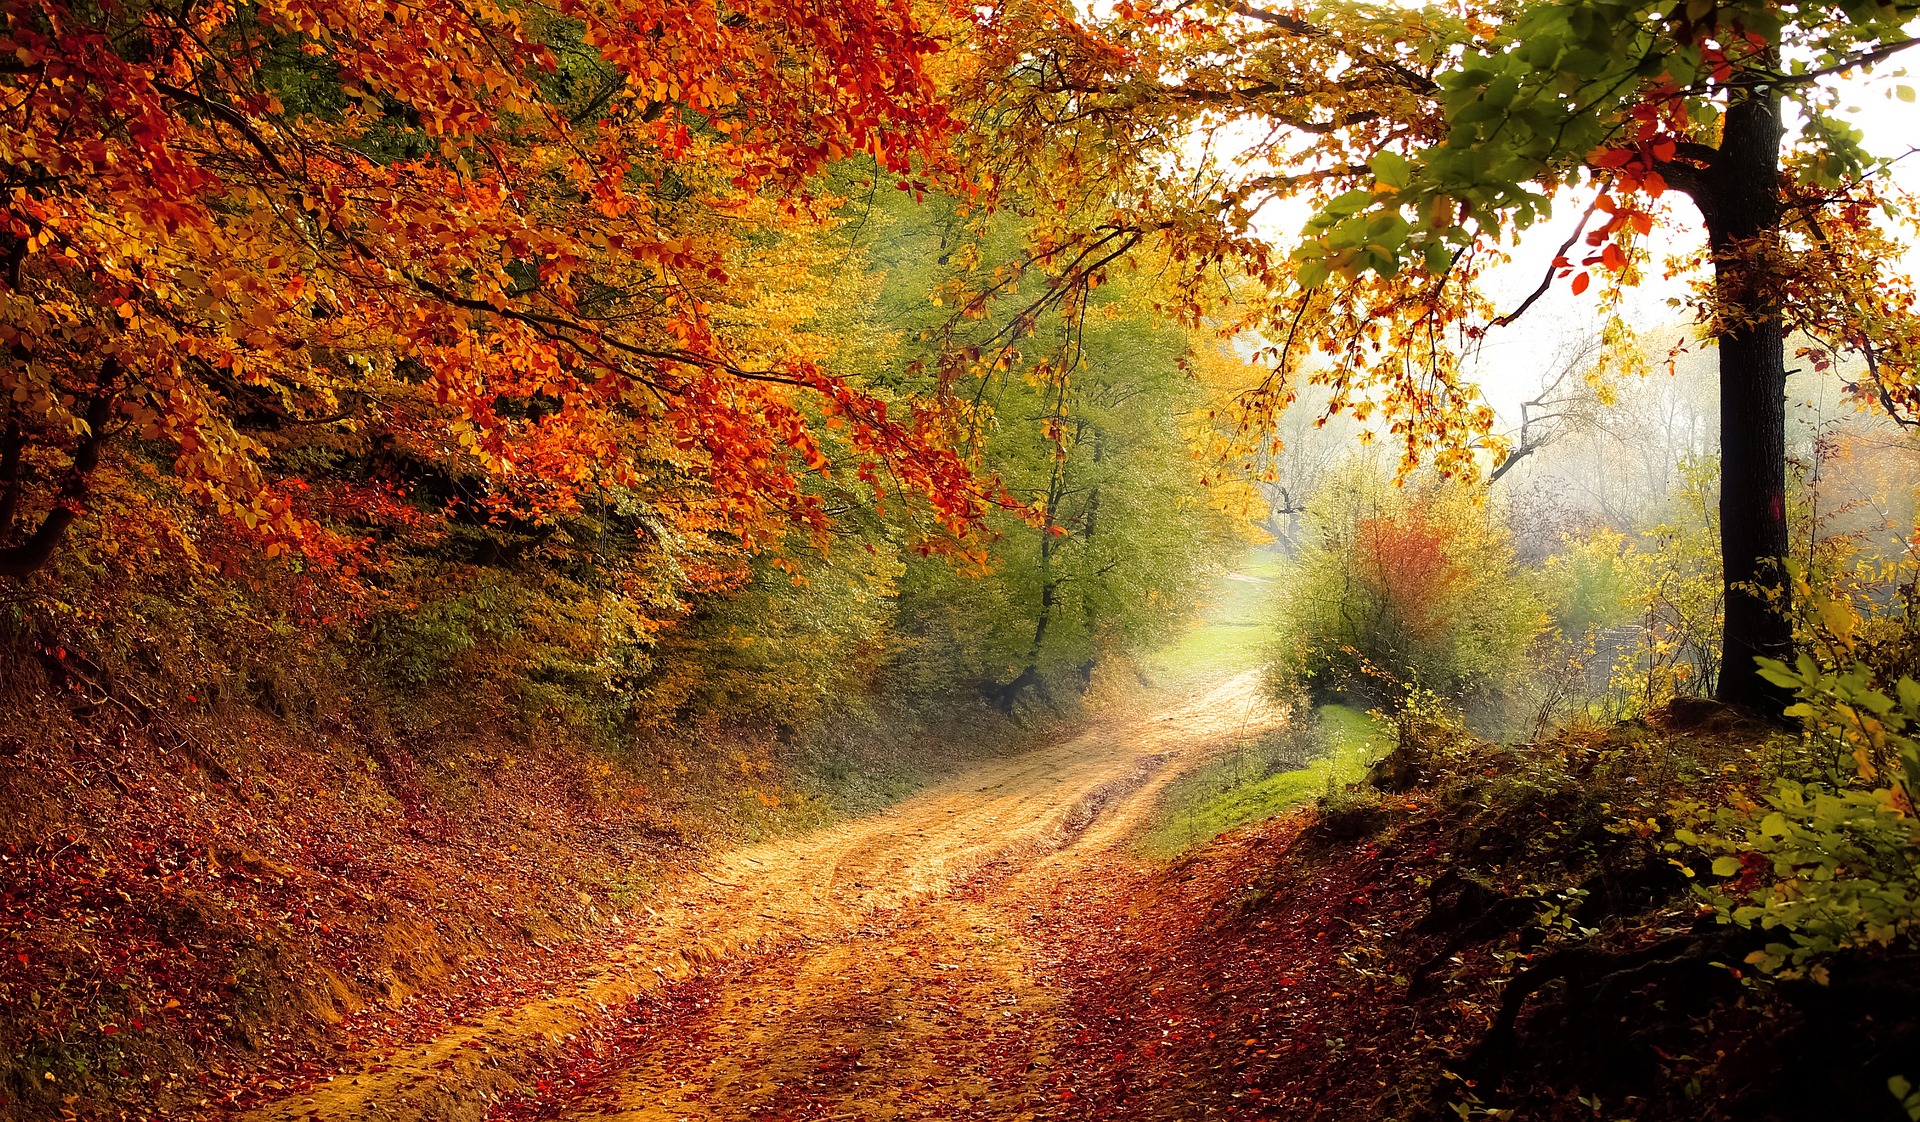 A forested fall road